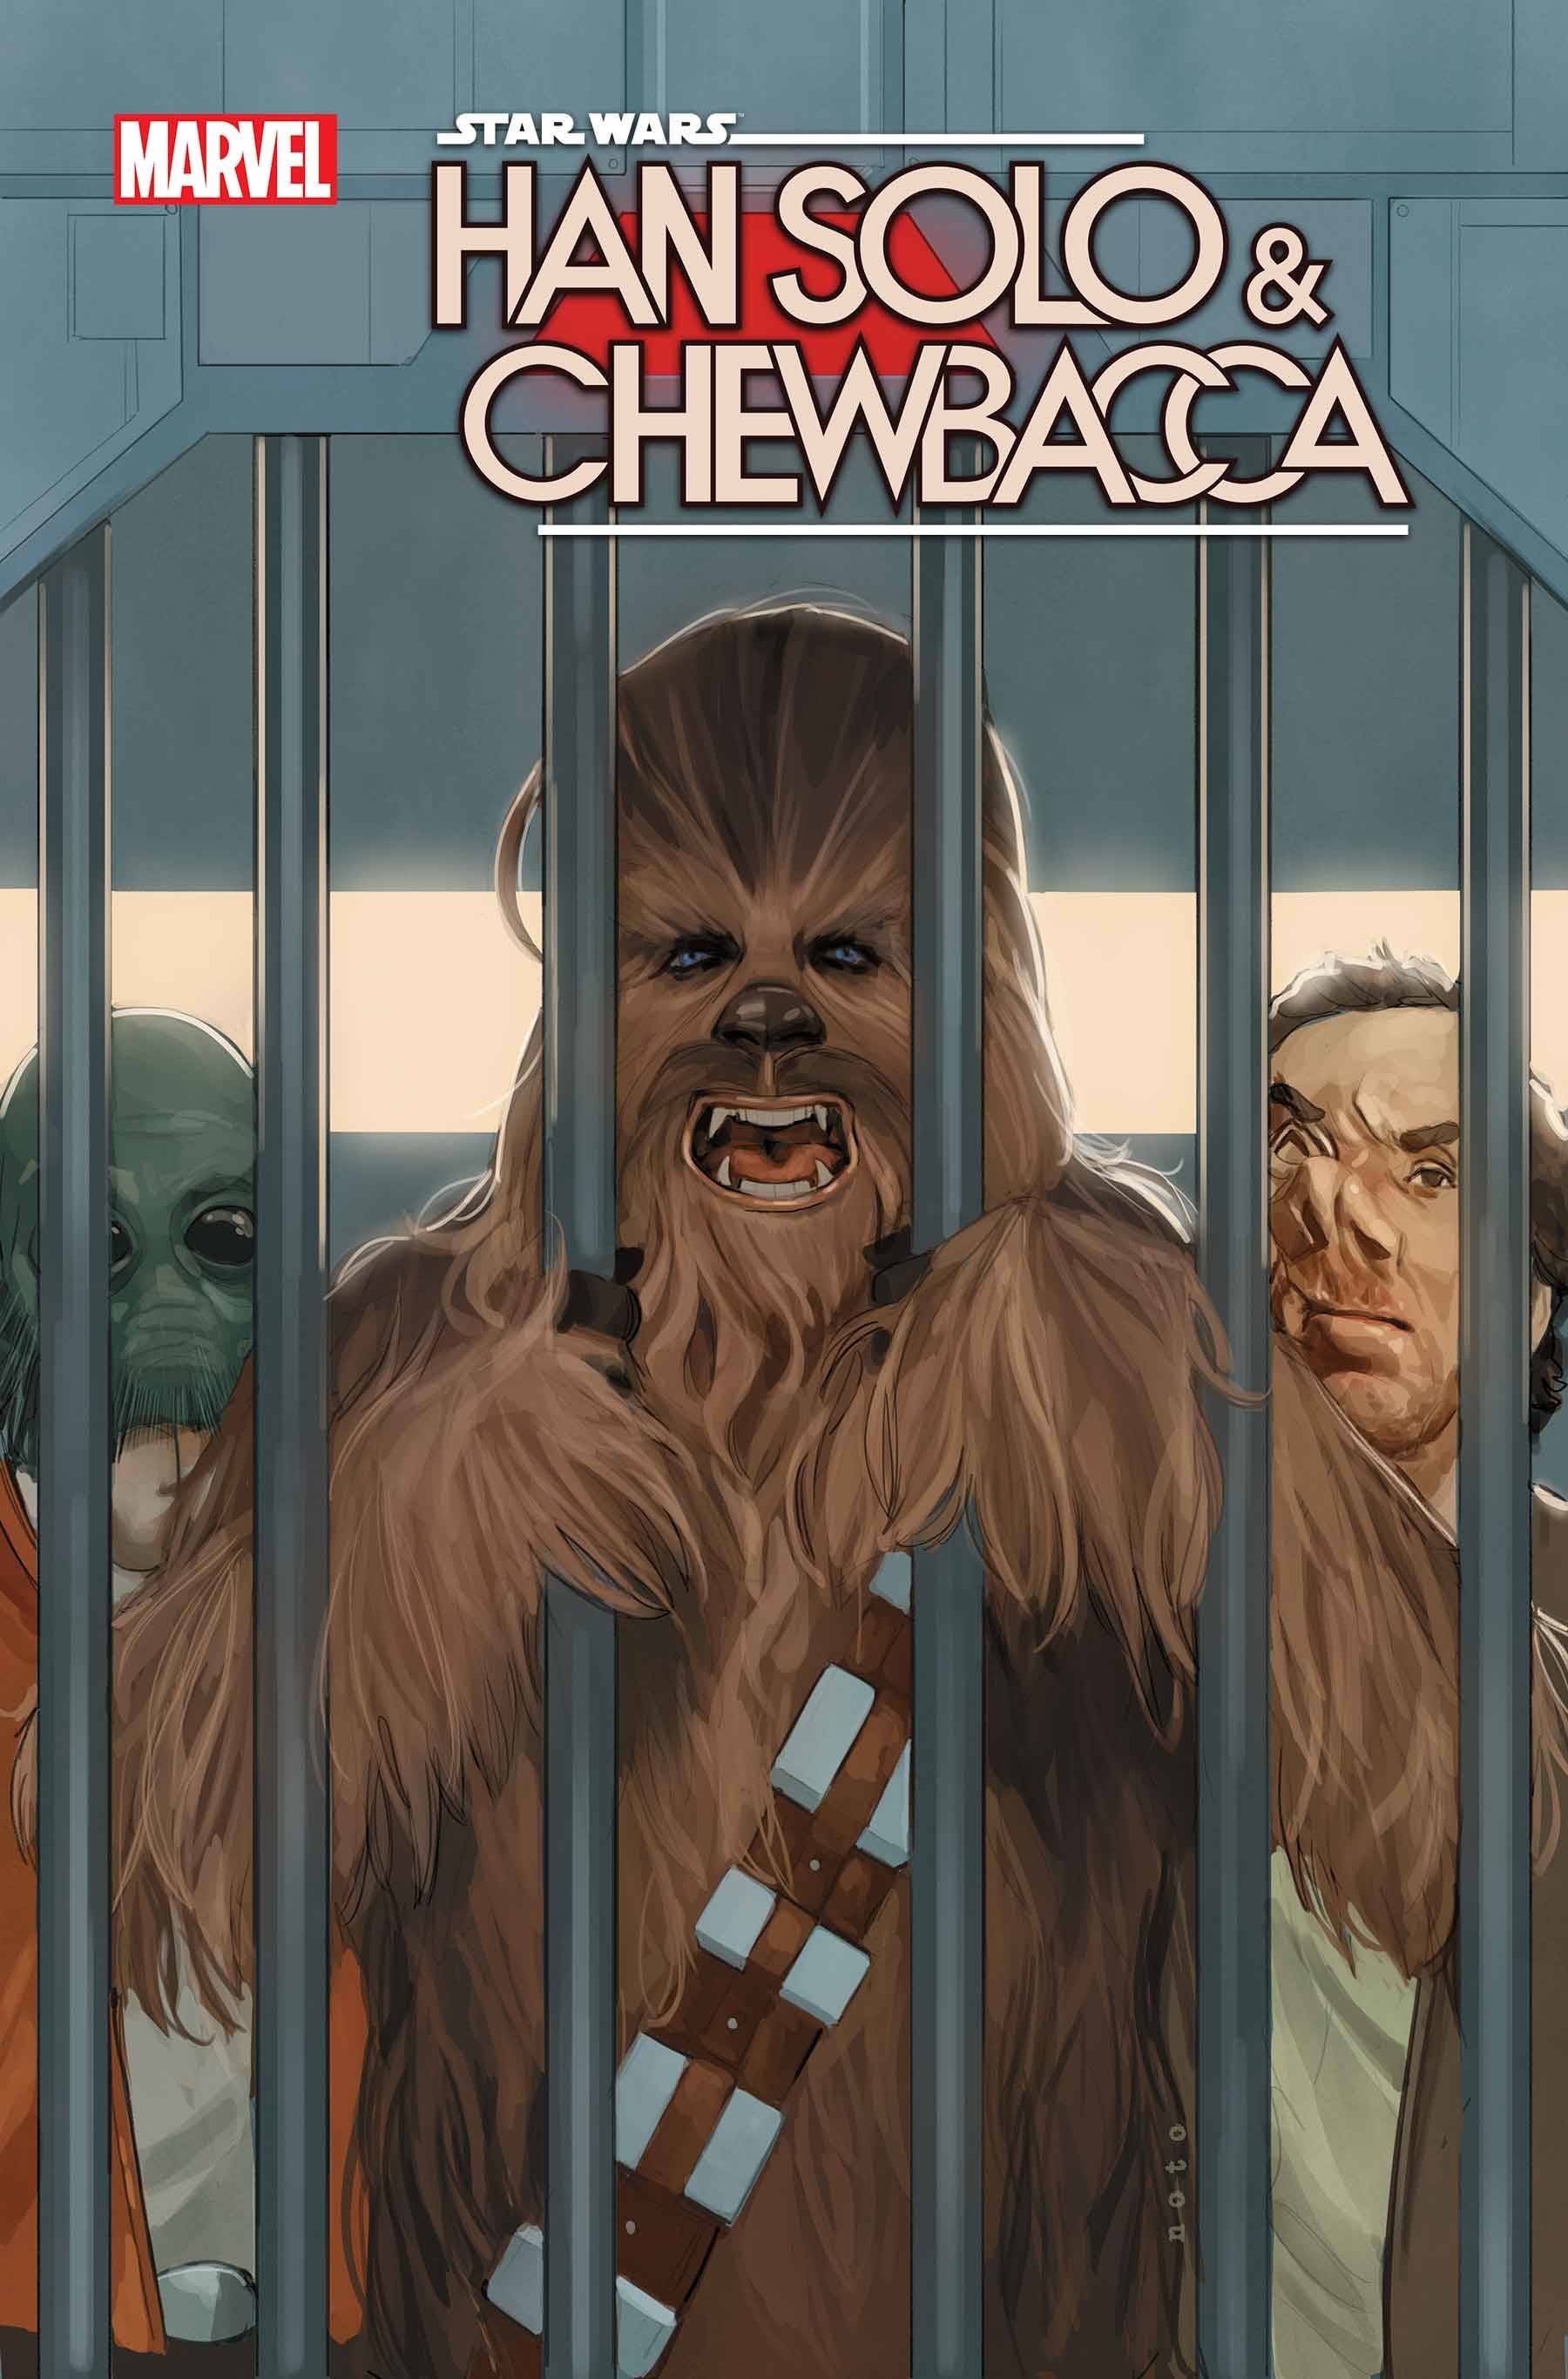 Star Wars Han Solo Chewbacca #6 (Res) - State of Comics